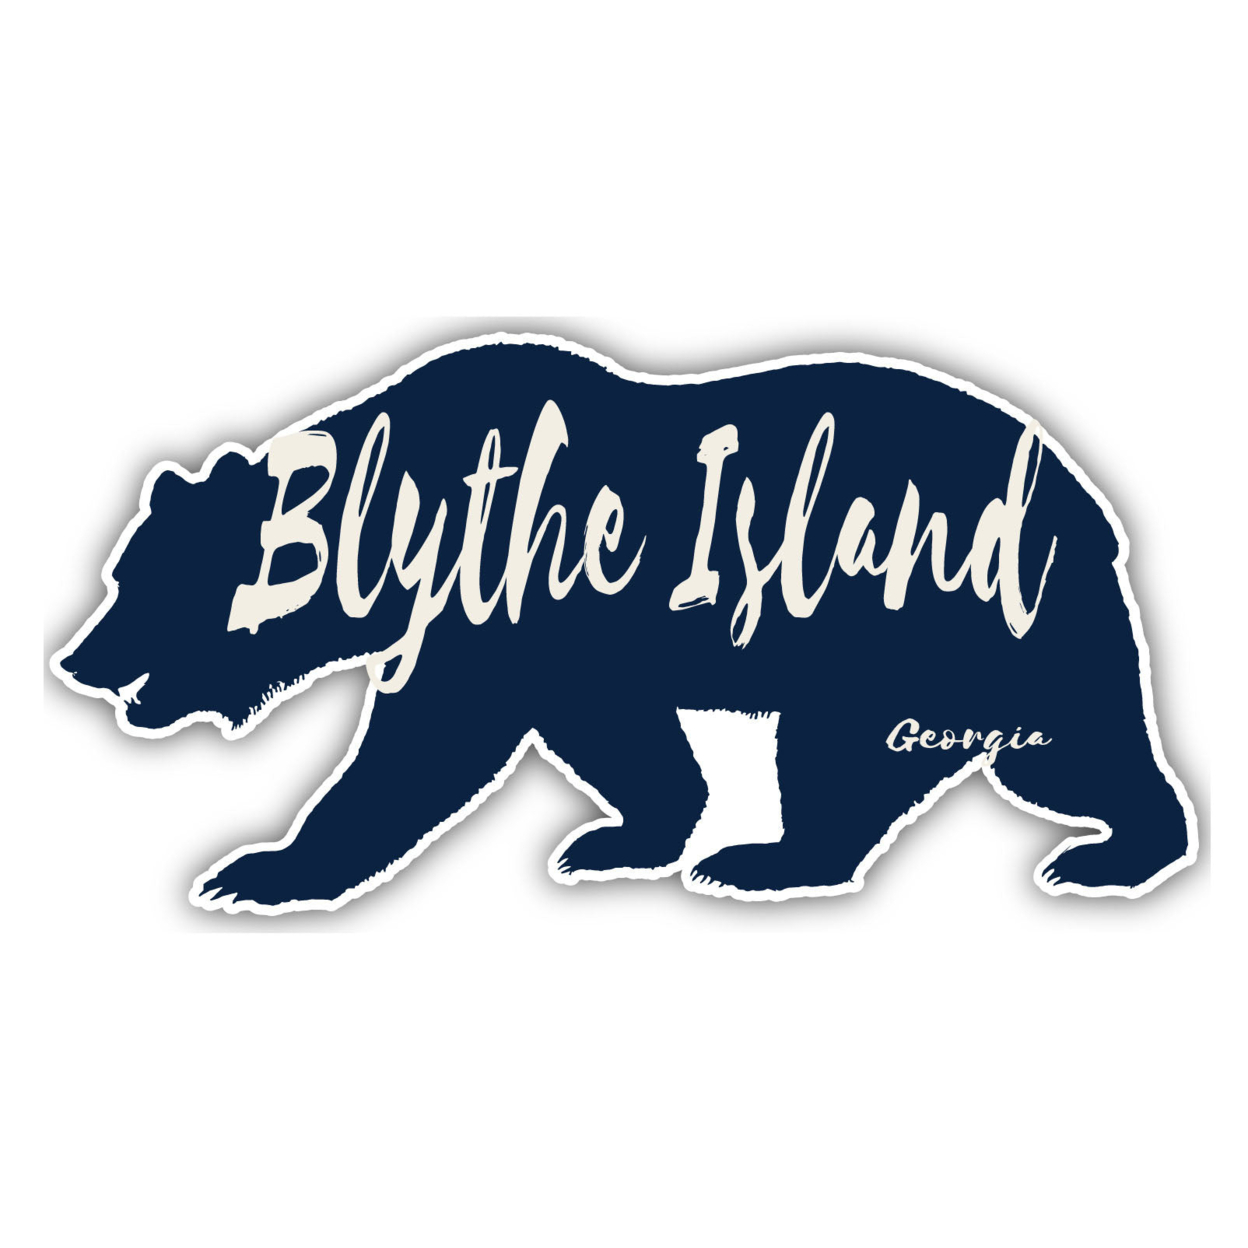 Blythe Island Georgia Souvenir Decorative Stickers (Choose Theme And Size) - 4-Pack, 2-Inch, Tent